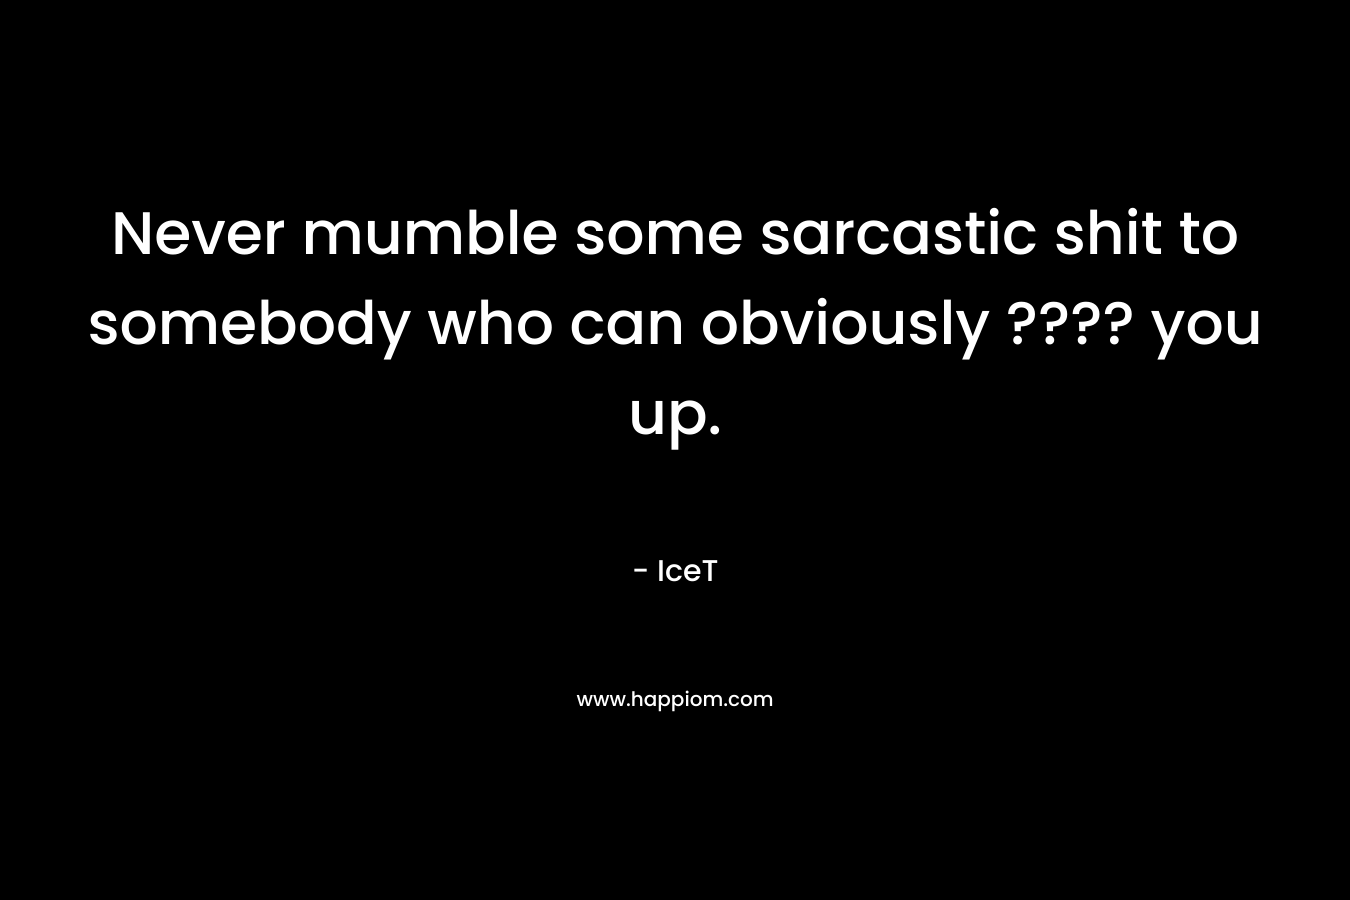 Never mumble some sarcastic shit to somebody who can obviously ???? you up.